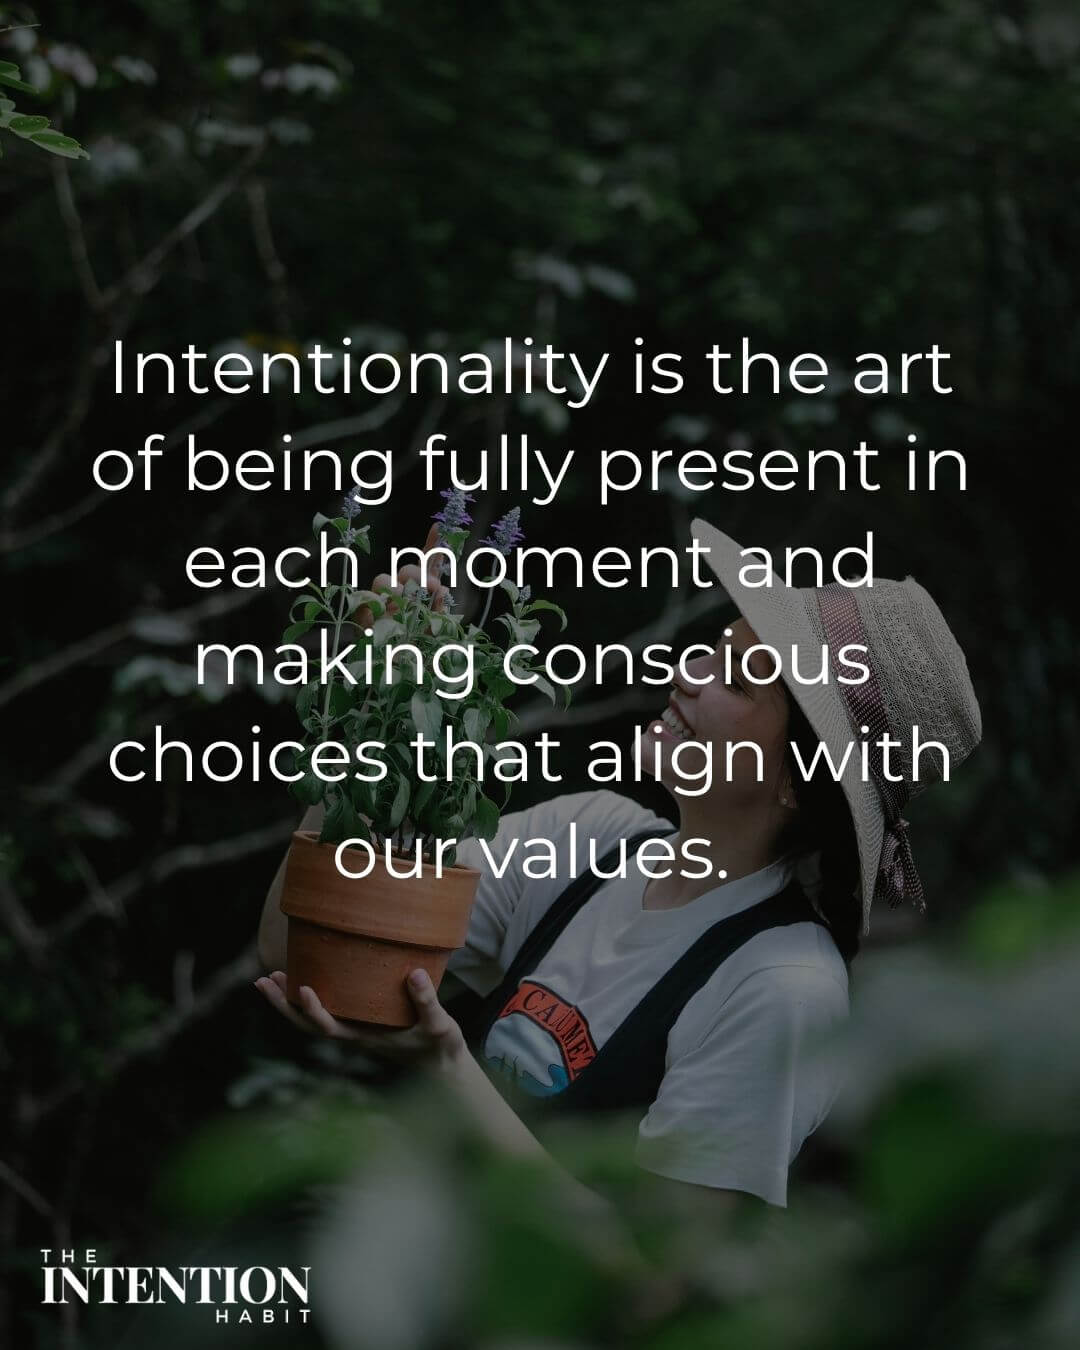 Intentional living quote - Intentionality is the art of being fully present in each moment and making conscious choices that align with our values